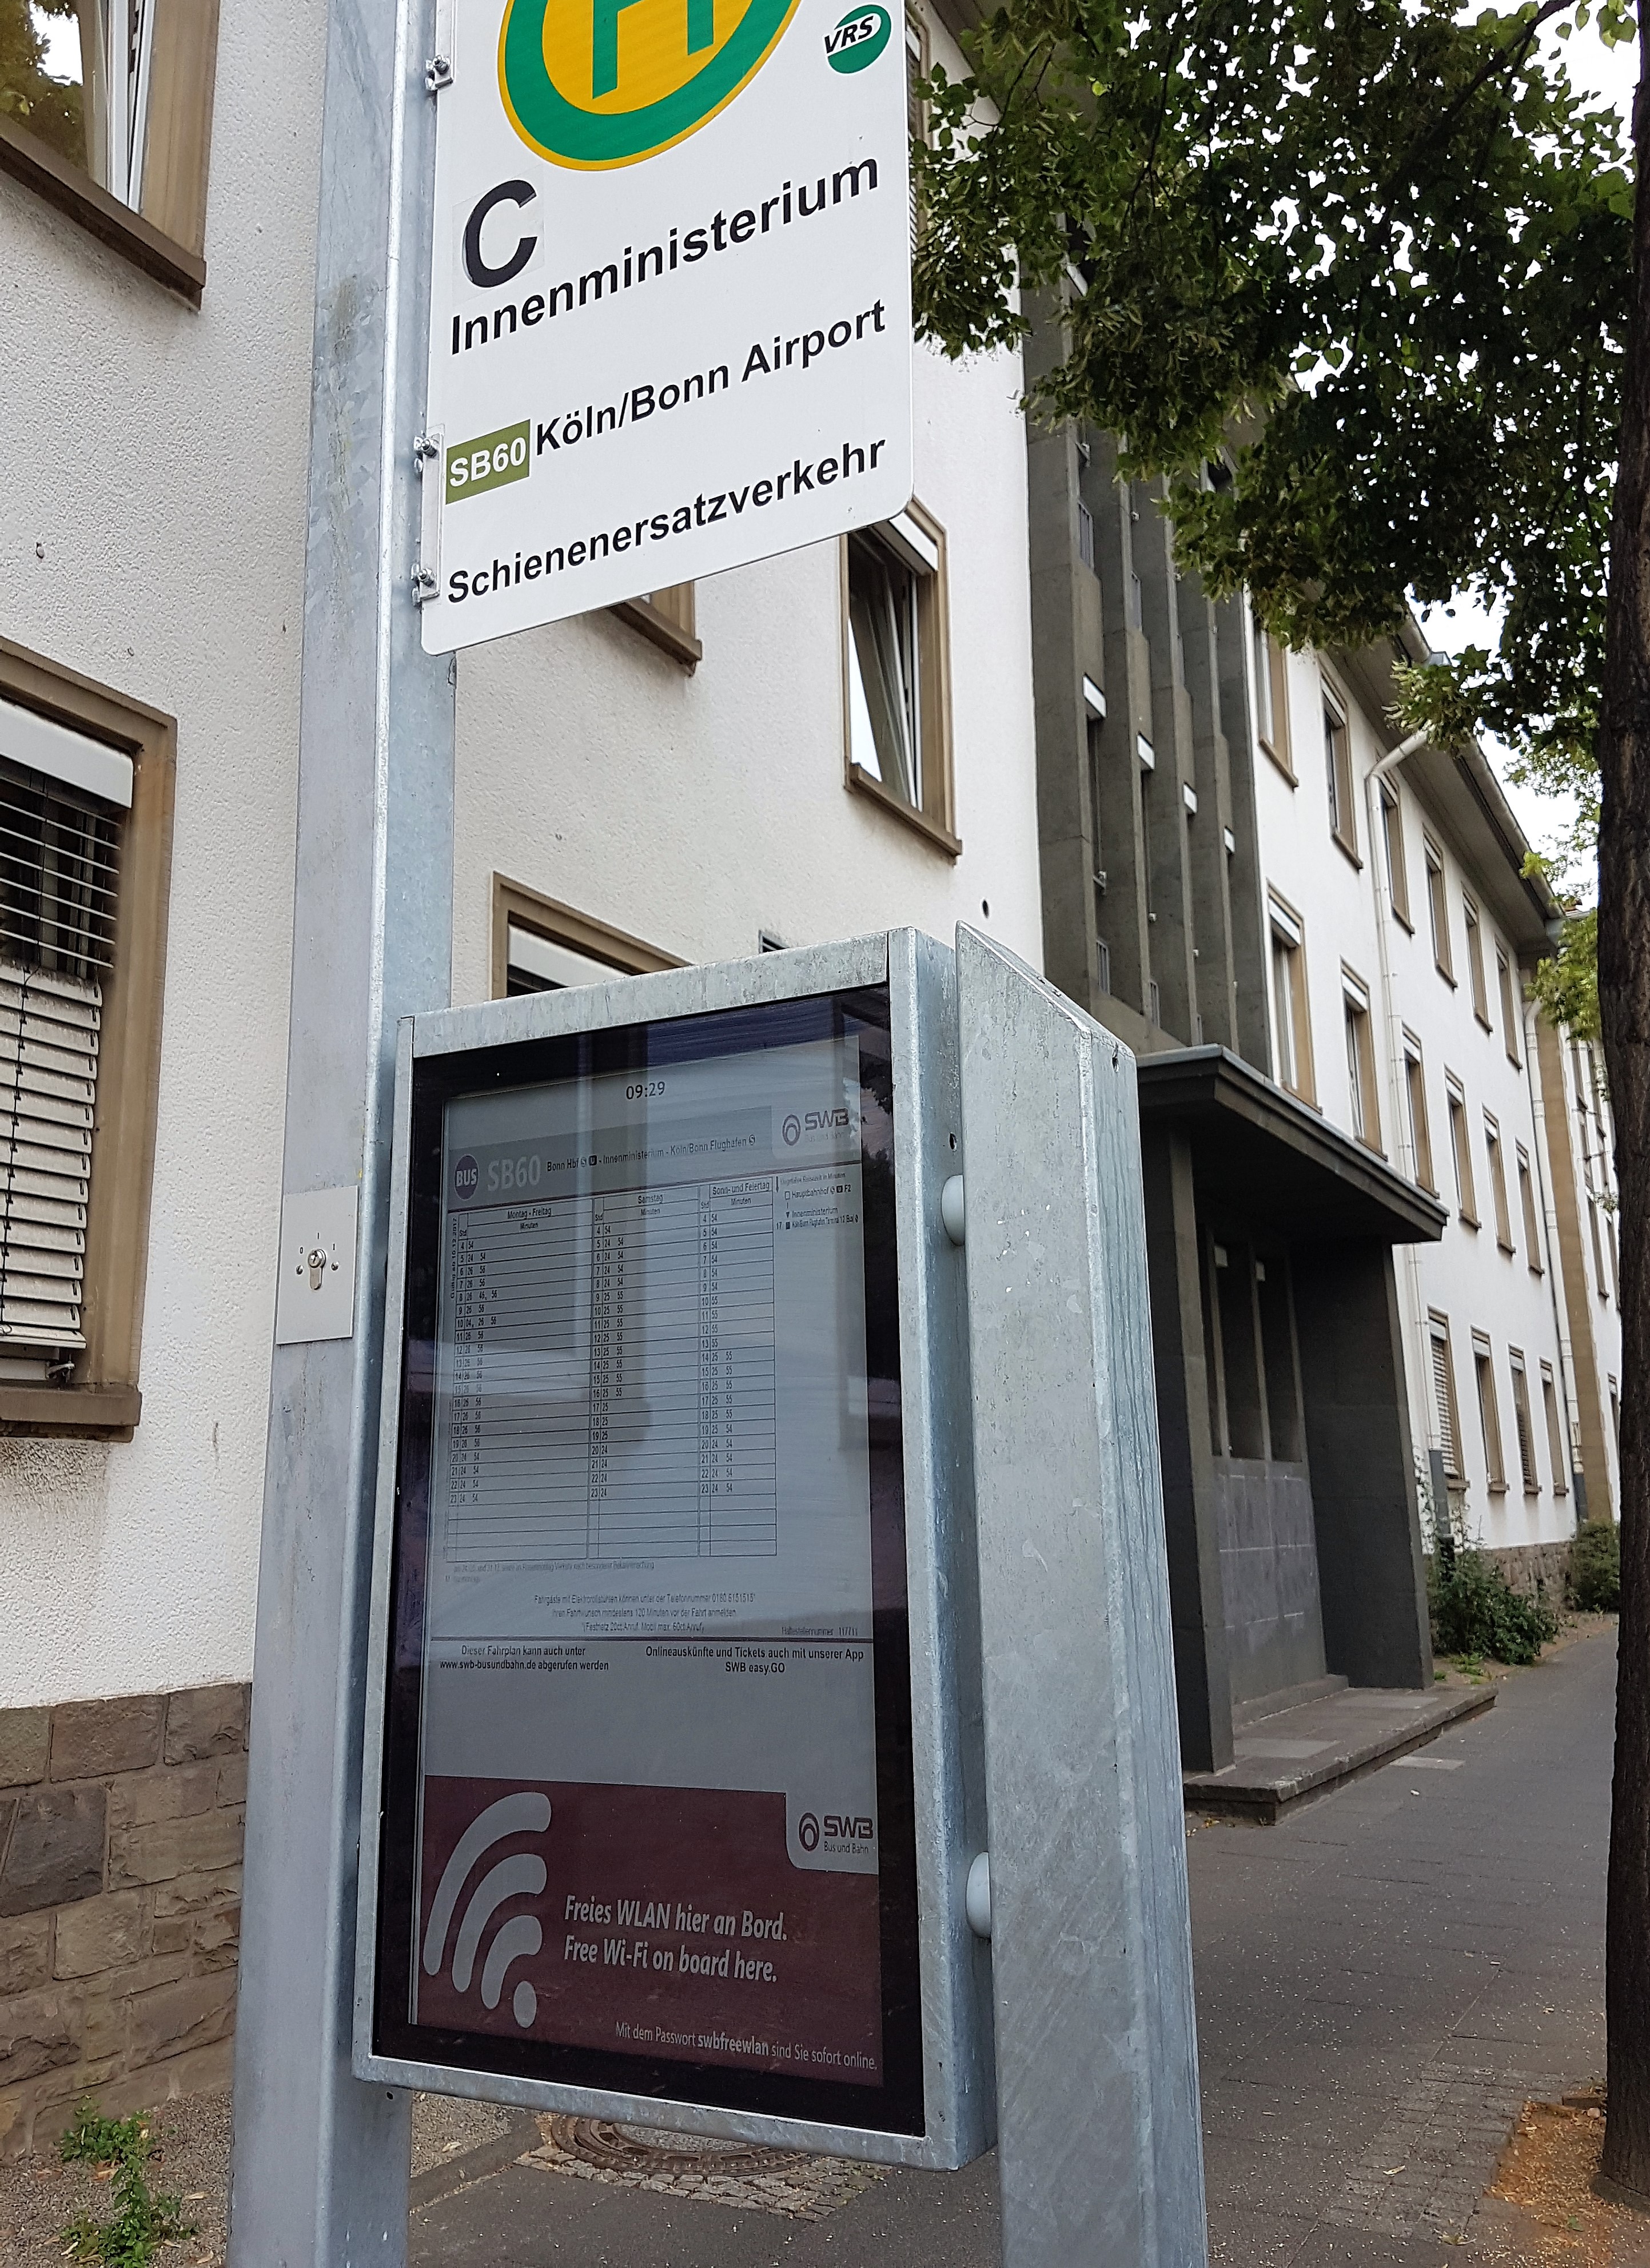 Bonn gets smart with Papercast e-paper bus stop displays